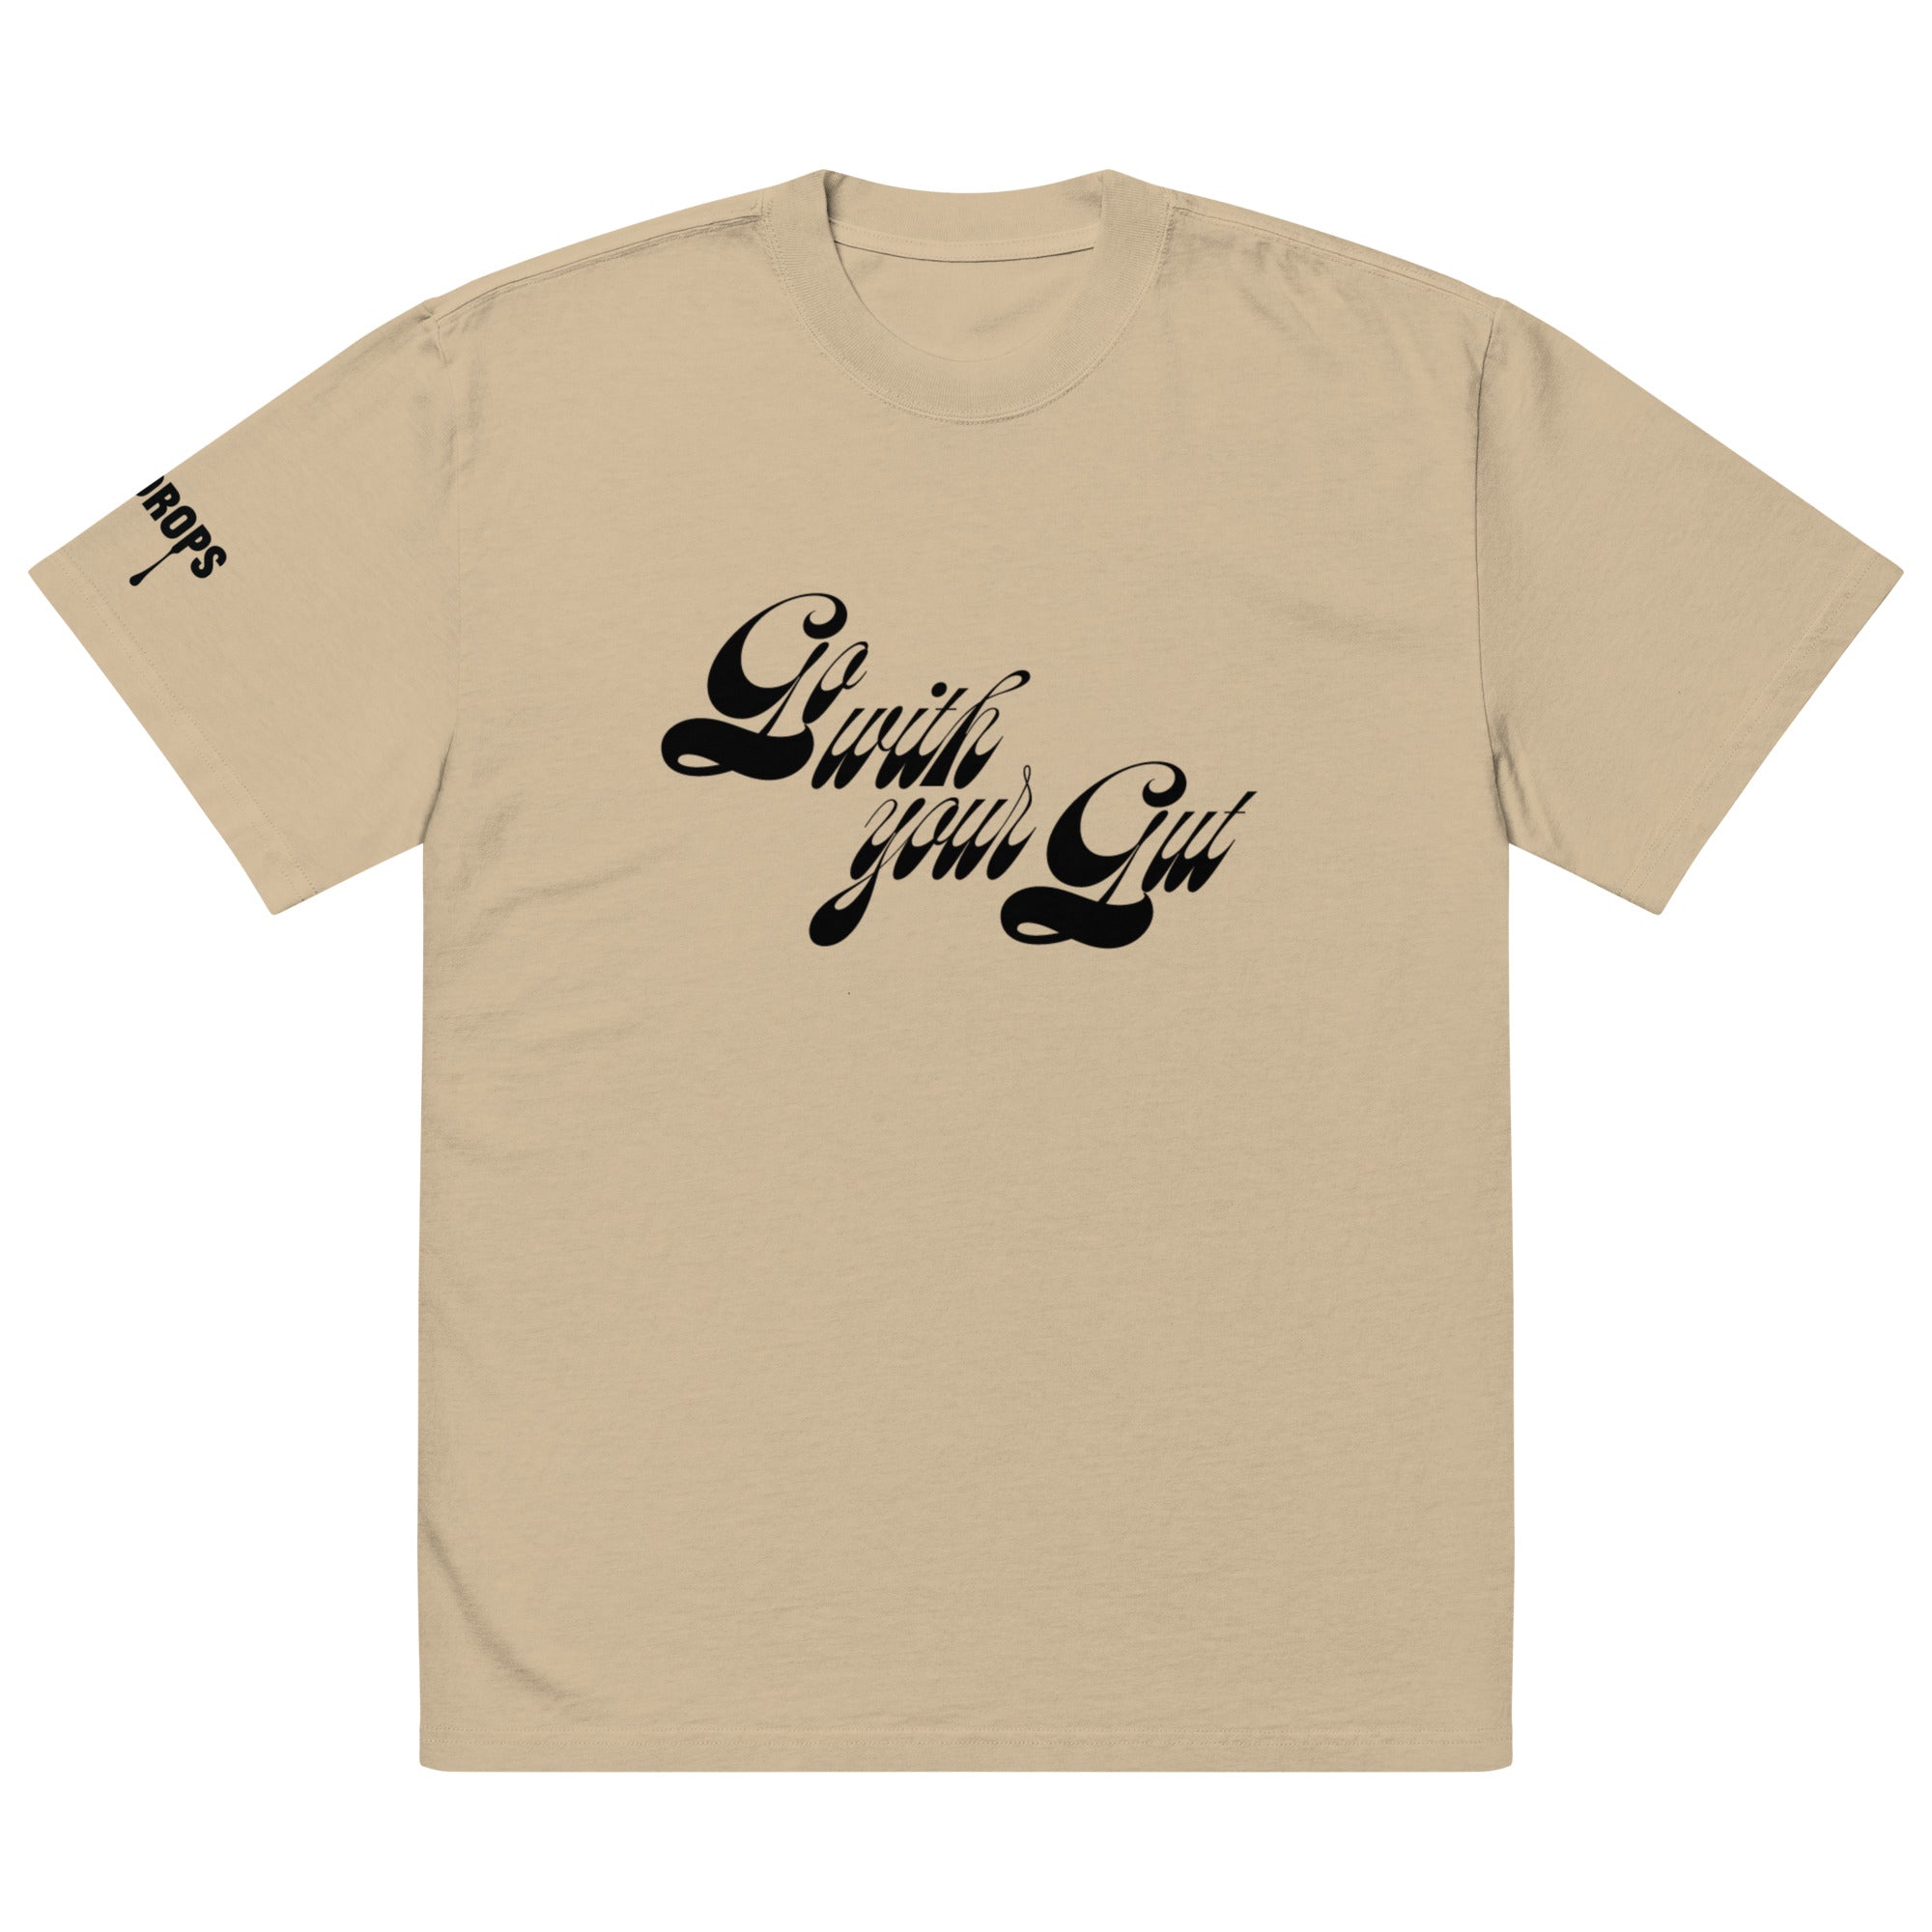 "Go with your Gut" t-shirt